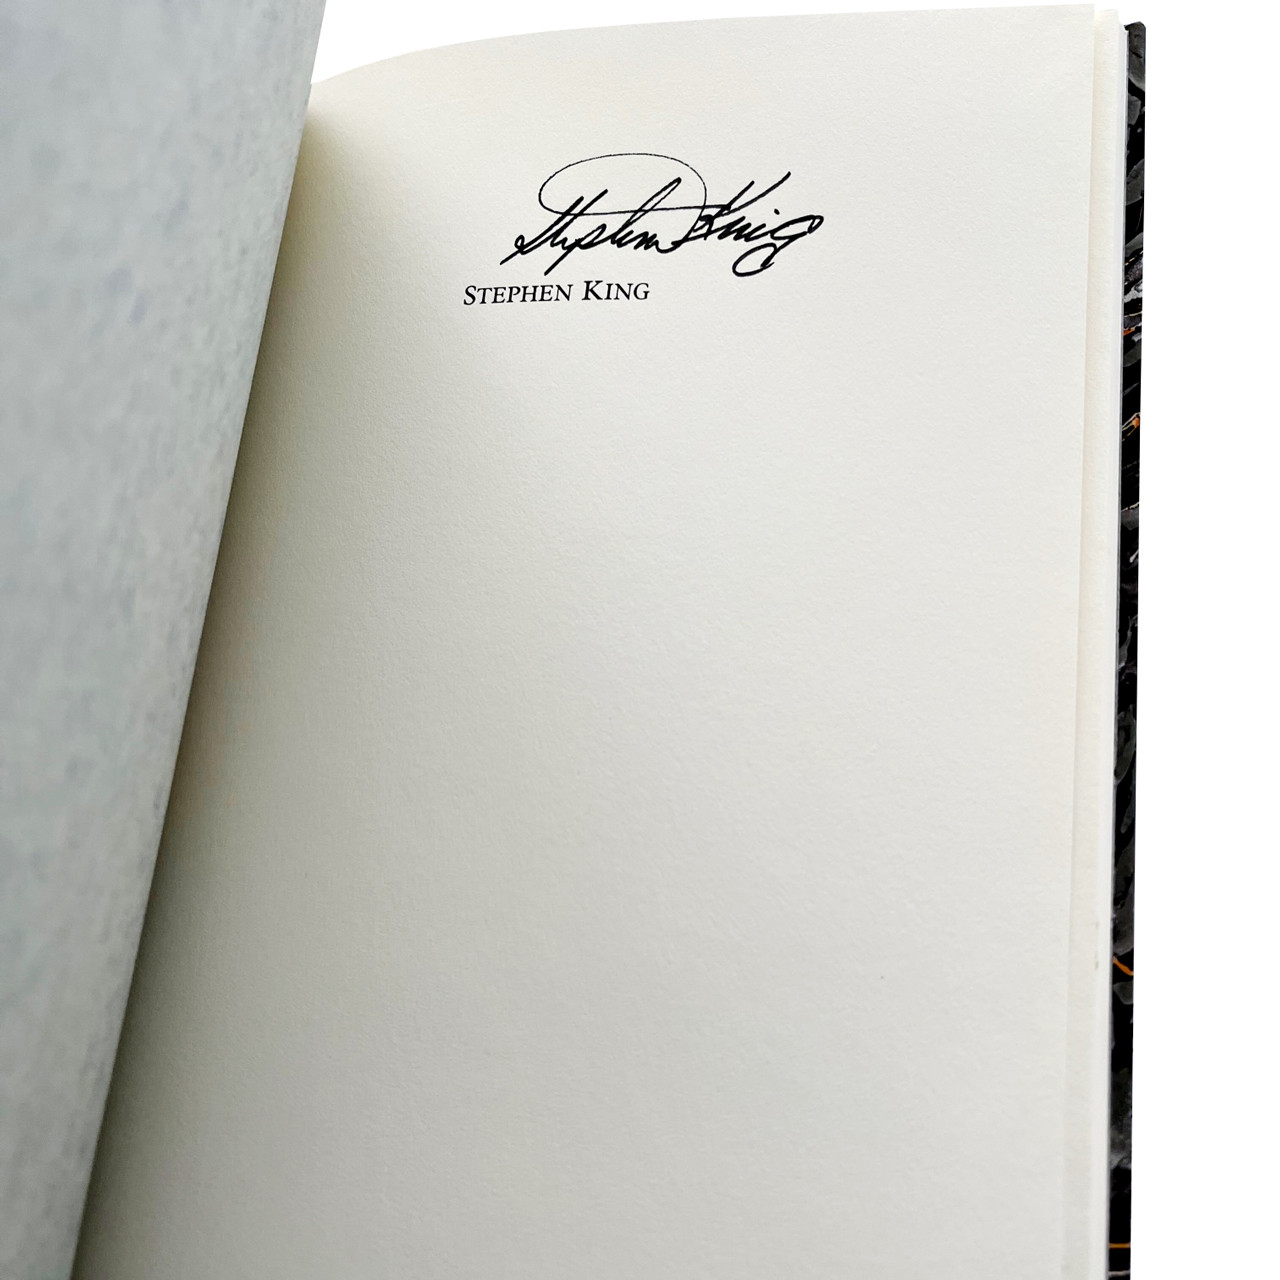 Stephen King "Dolan's Cadillac" Signed First Edition, Deluxe Limited Edition No. 207 of 250, Custom Numbers Matching Slipcase